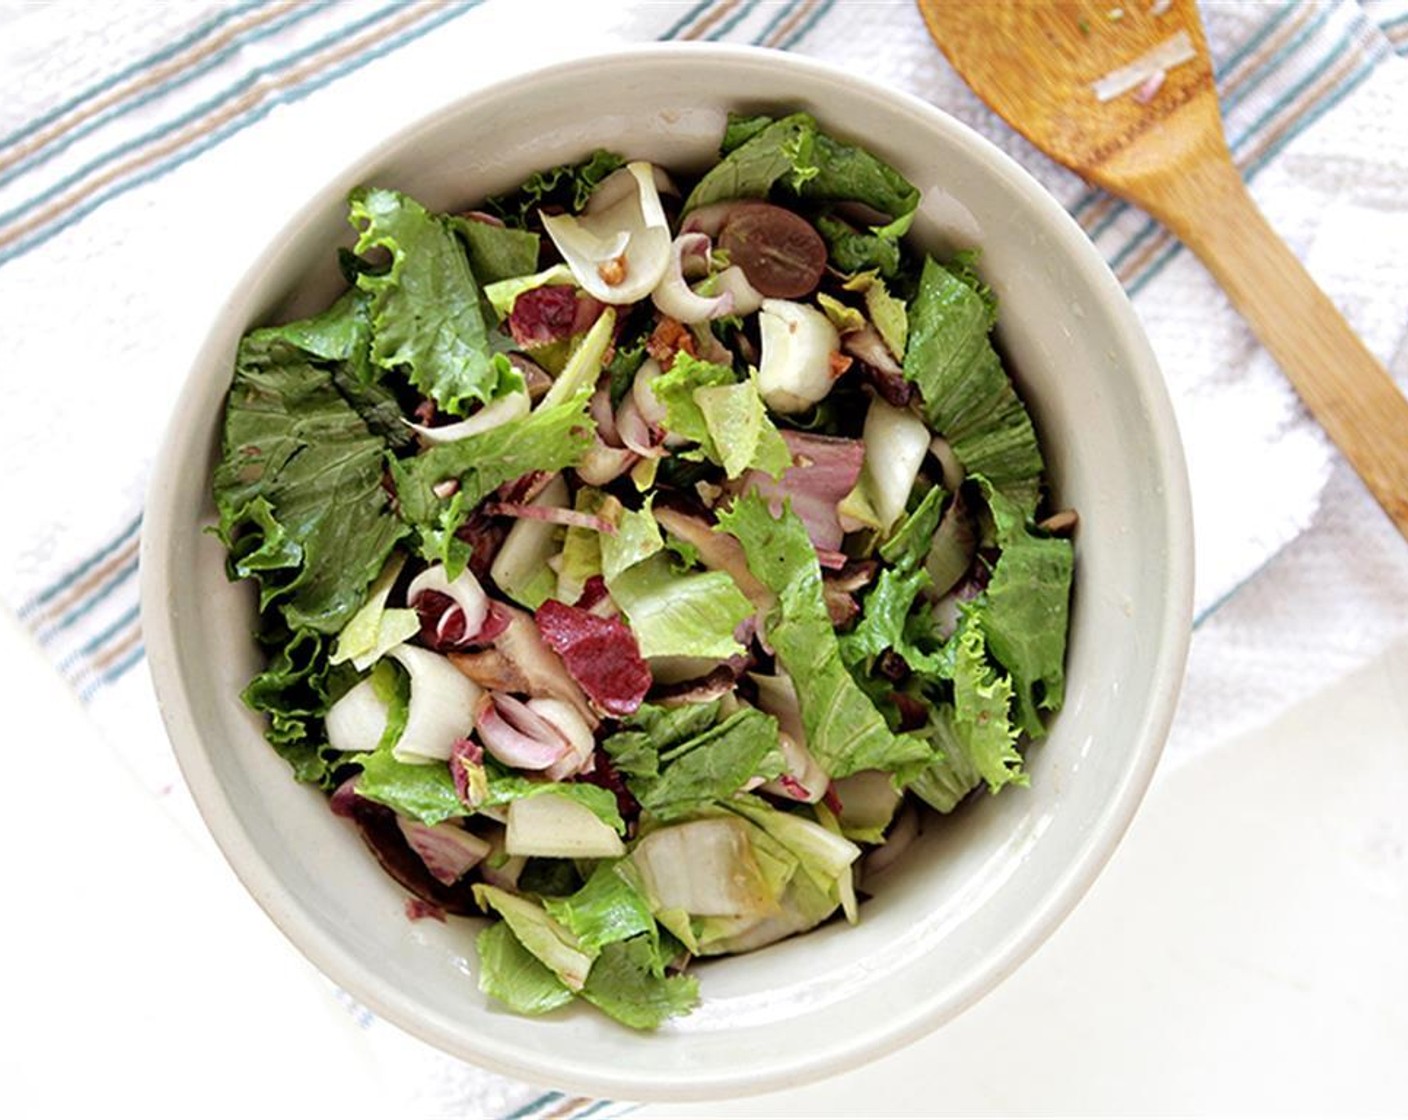 step 10 Roughly chop the pecans and place in a mixing bowl, add mixed lettuces and Red Seedless Grapes (1/2 cup). Once the toasted bread is ready, add the shiitakes and the dressing to the bowl and gently mix to combine. Season with Kosher Salt (to taste) and Ground Black Pepper (to taste).